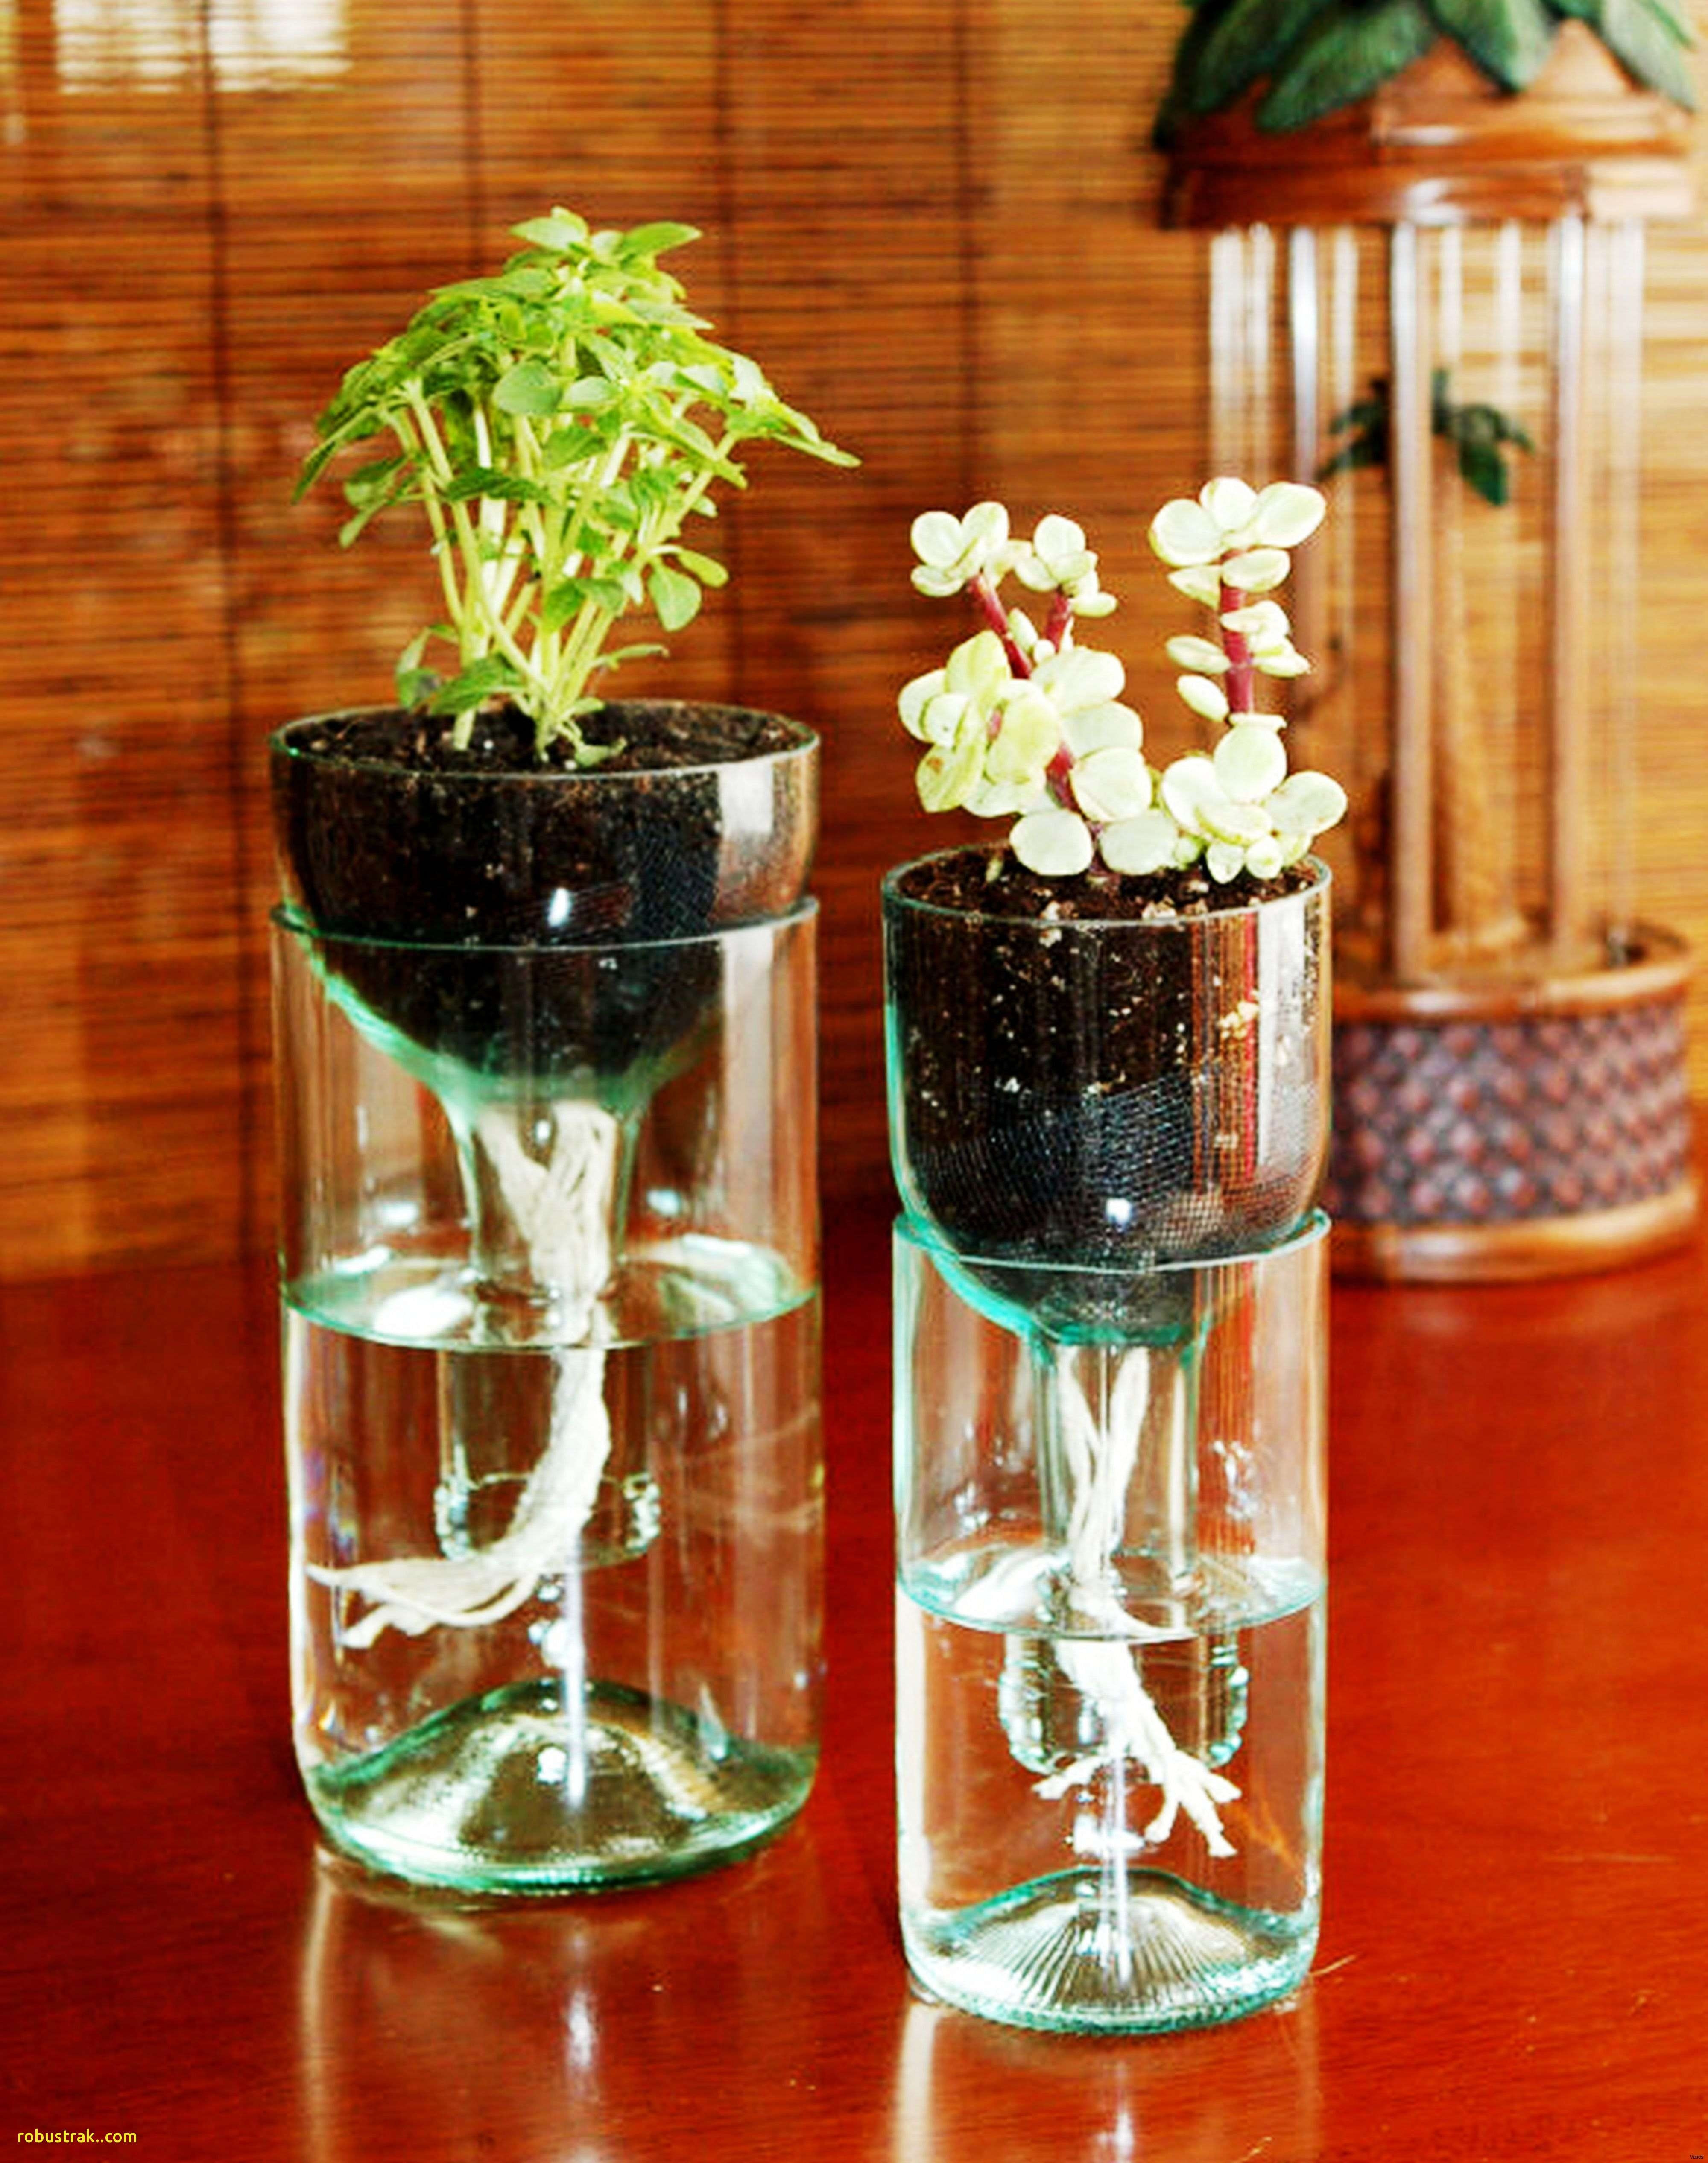 24 Fashionable Cheap Tall Clear Vases 2022 free download cheap tall clear vases of home decoration vases 91fuecthjul sl1500 h vases tall floor home inside home decoration vases unique glass bowl centerpiece decorating ideas of home decoration vase